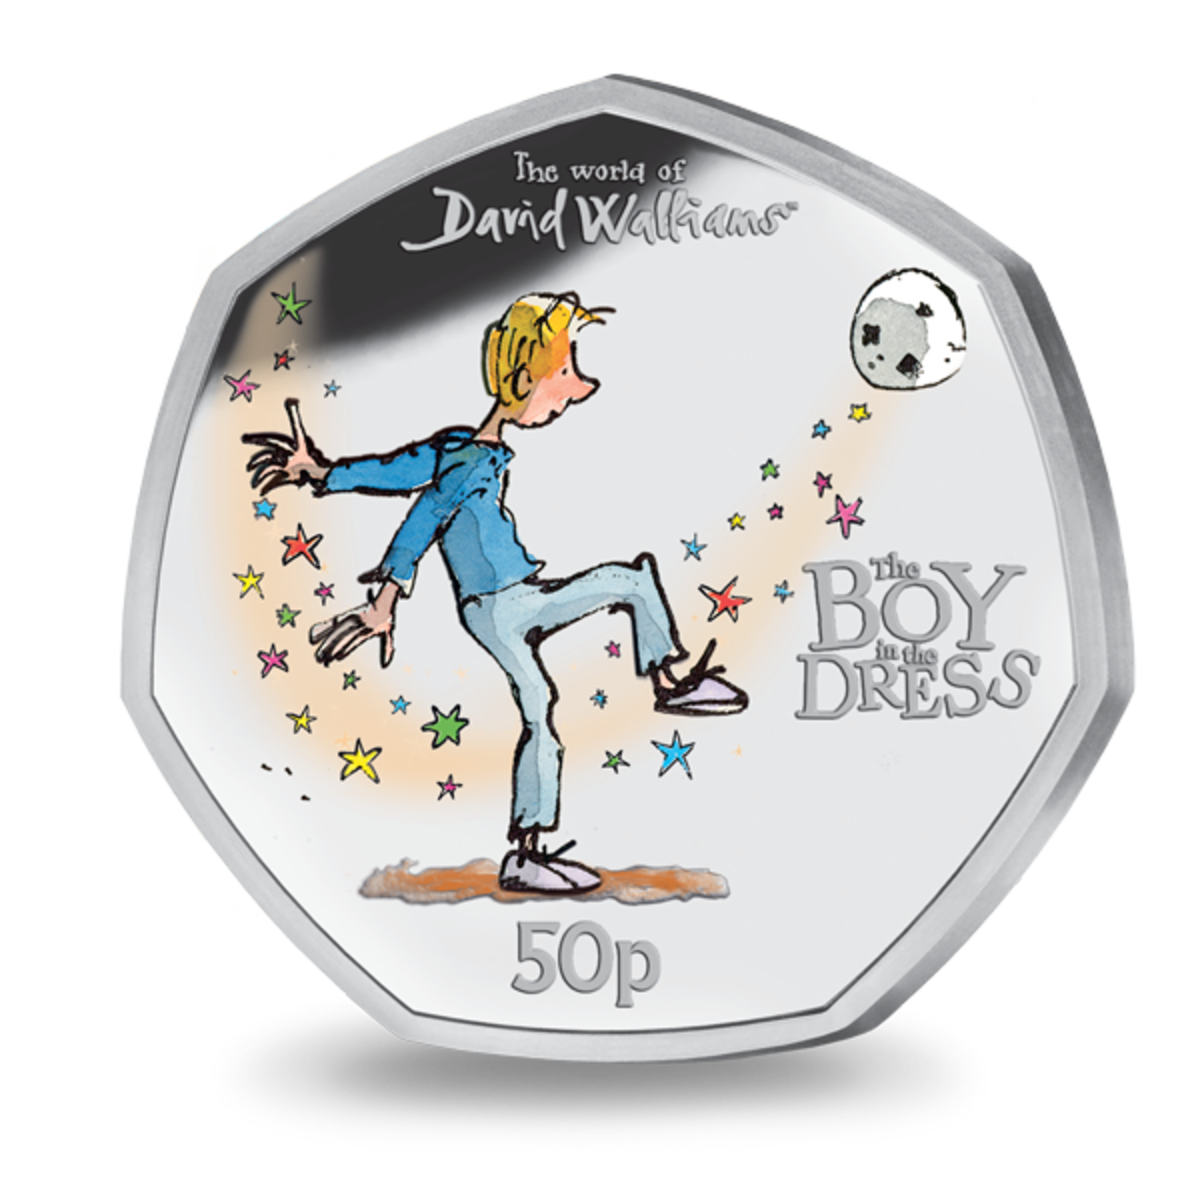 The first coin in The World of David Walliams 50 Pence coin series for Gibraltar features art from the books cover, by illustrator Quentin Blake.